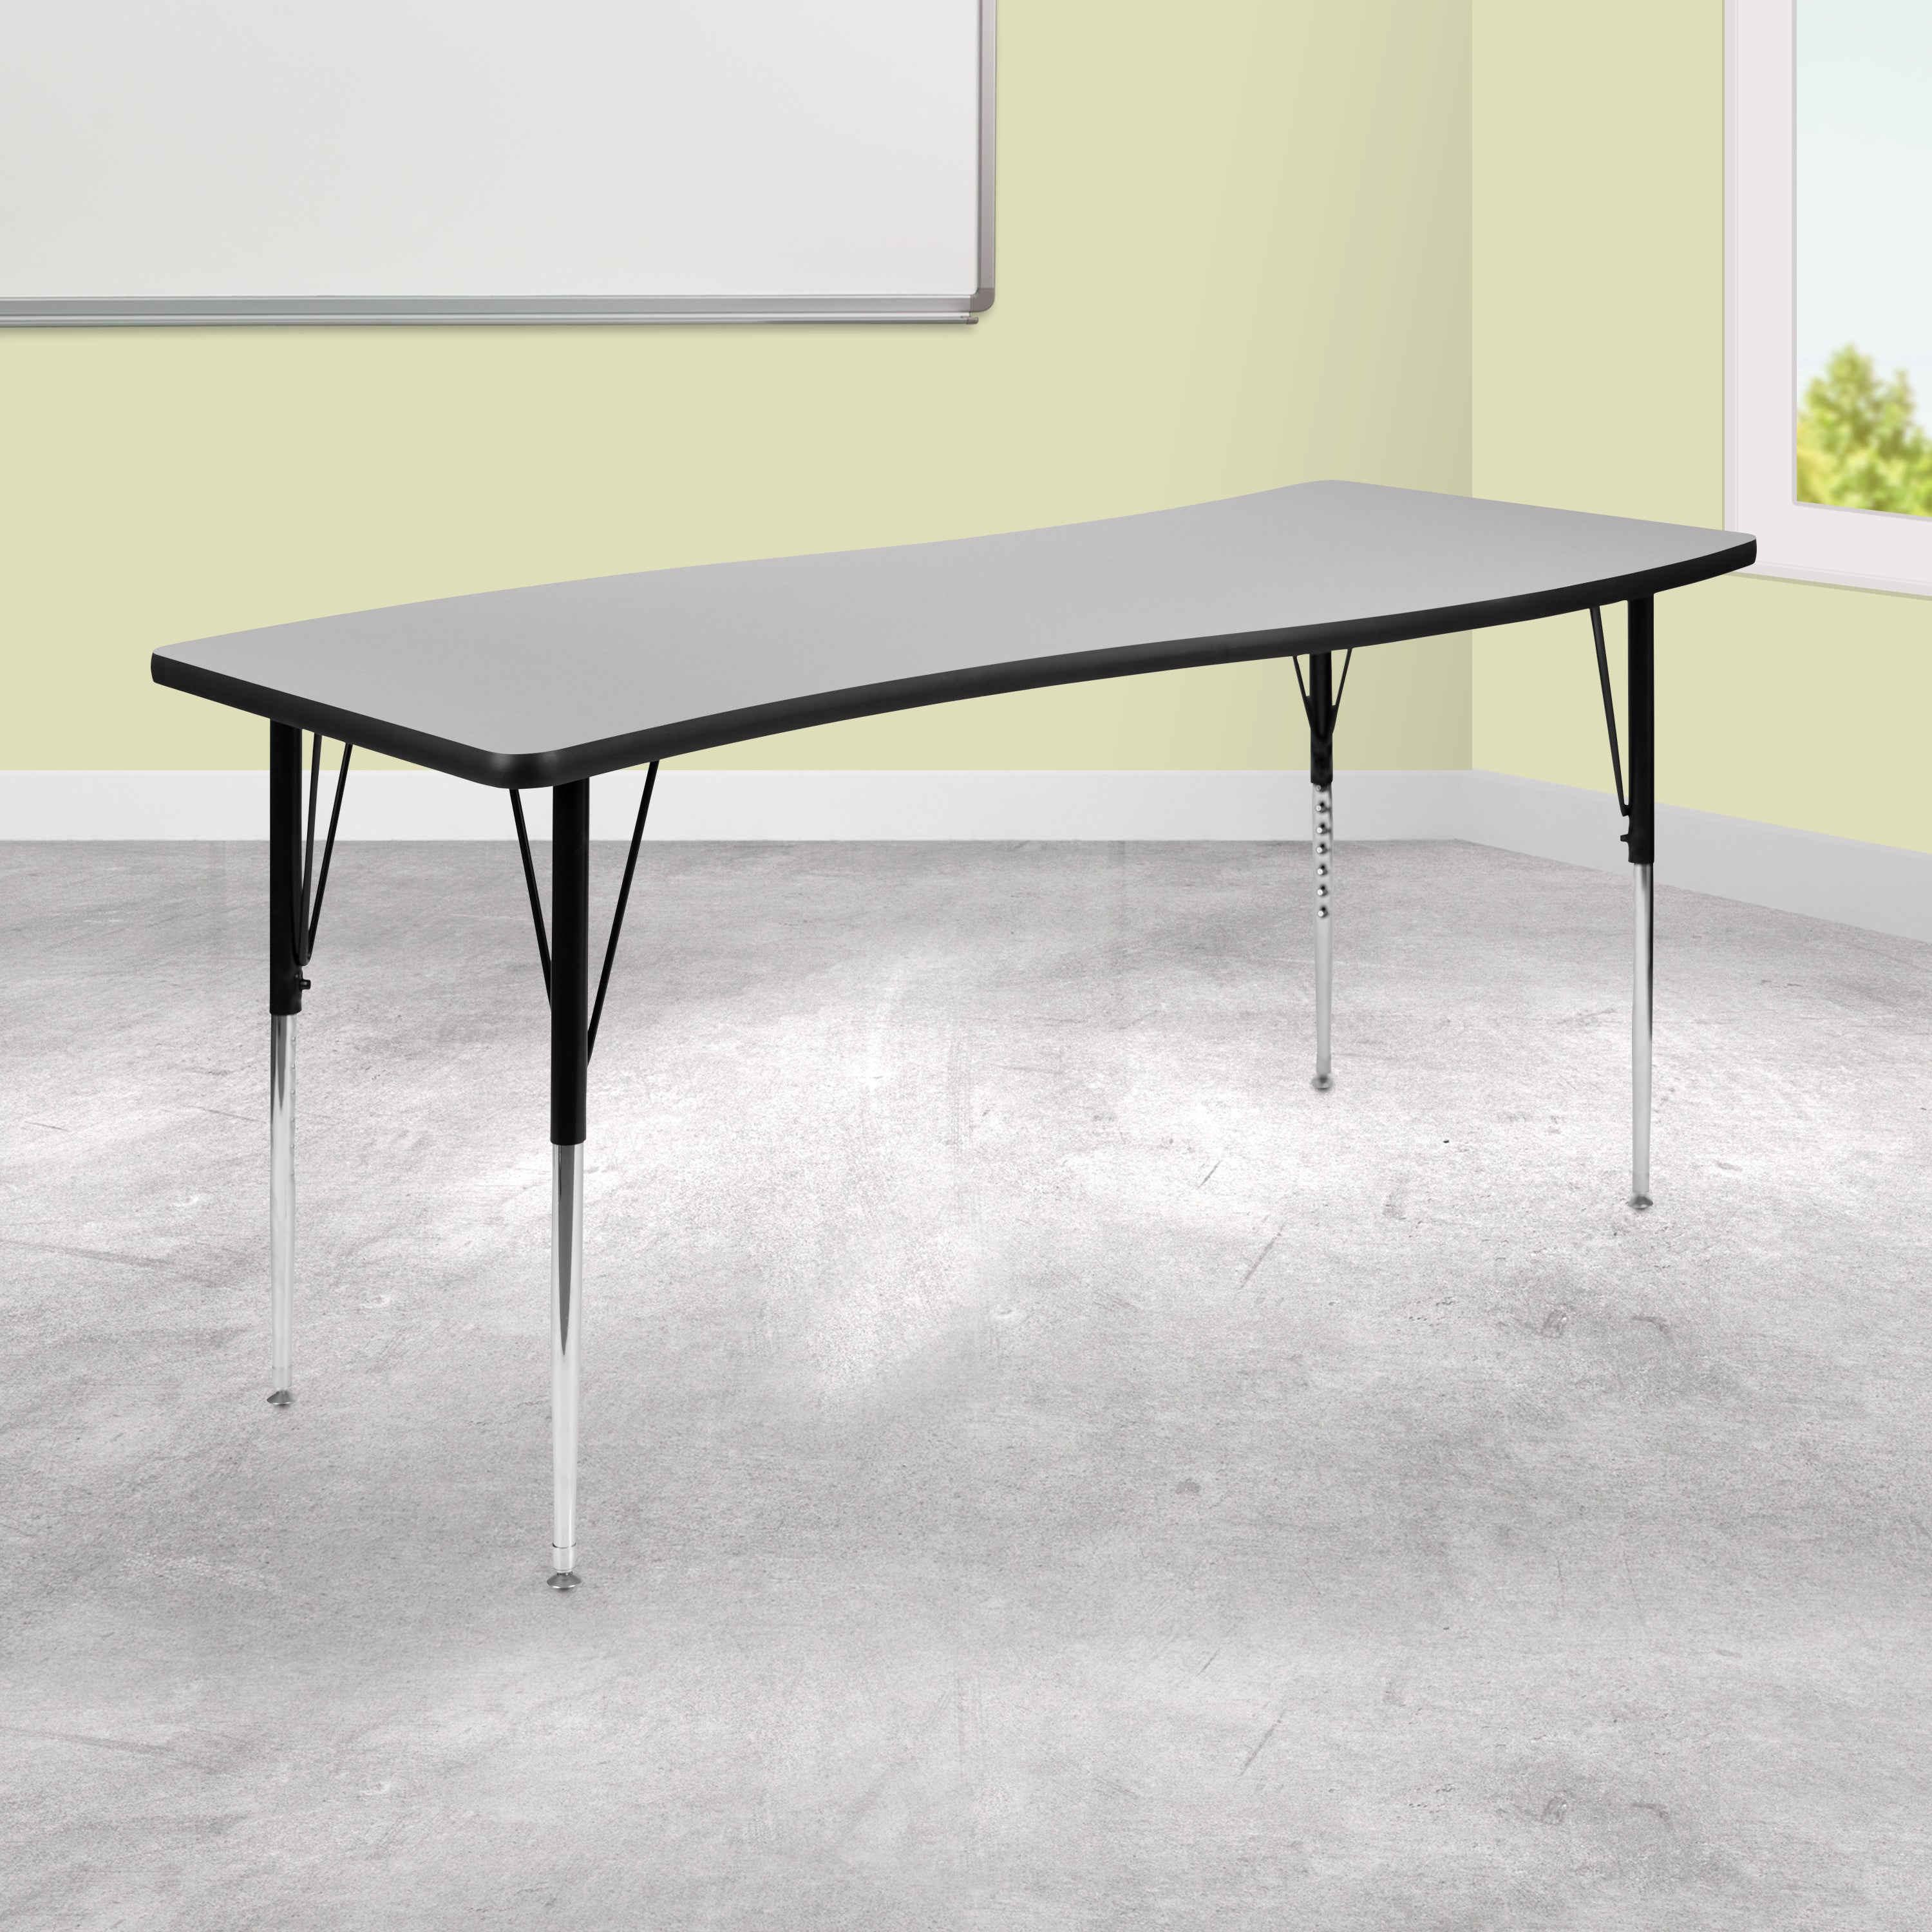 26"W x 60"L Rectangle Wave Flexible Collaborative Thermal Laminate Activity Table - Standard Height Adjustable Legs-Collaborative Rectangular Activity Table-Flash Furniture-Wall2Wall Furnishings